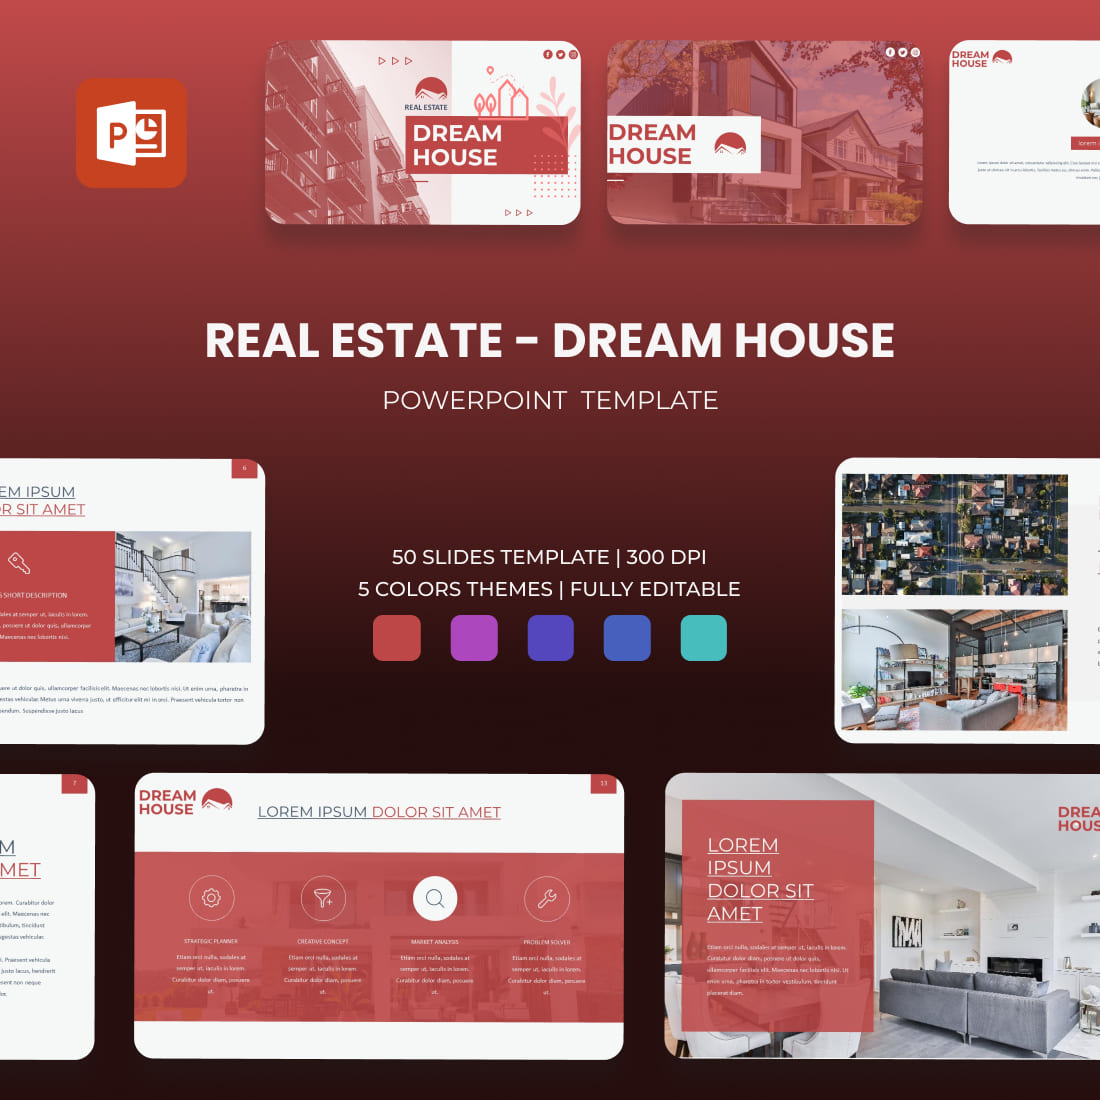 Dream House Powerpoint Template main cover.